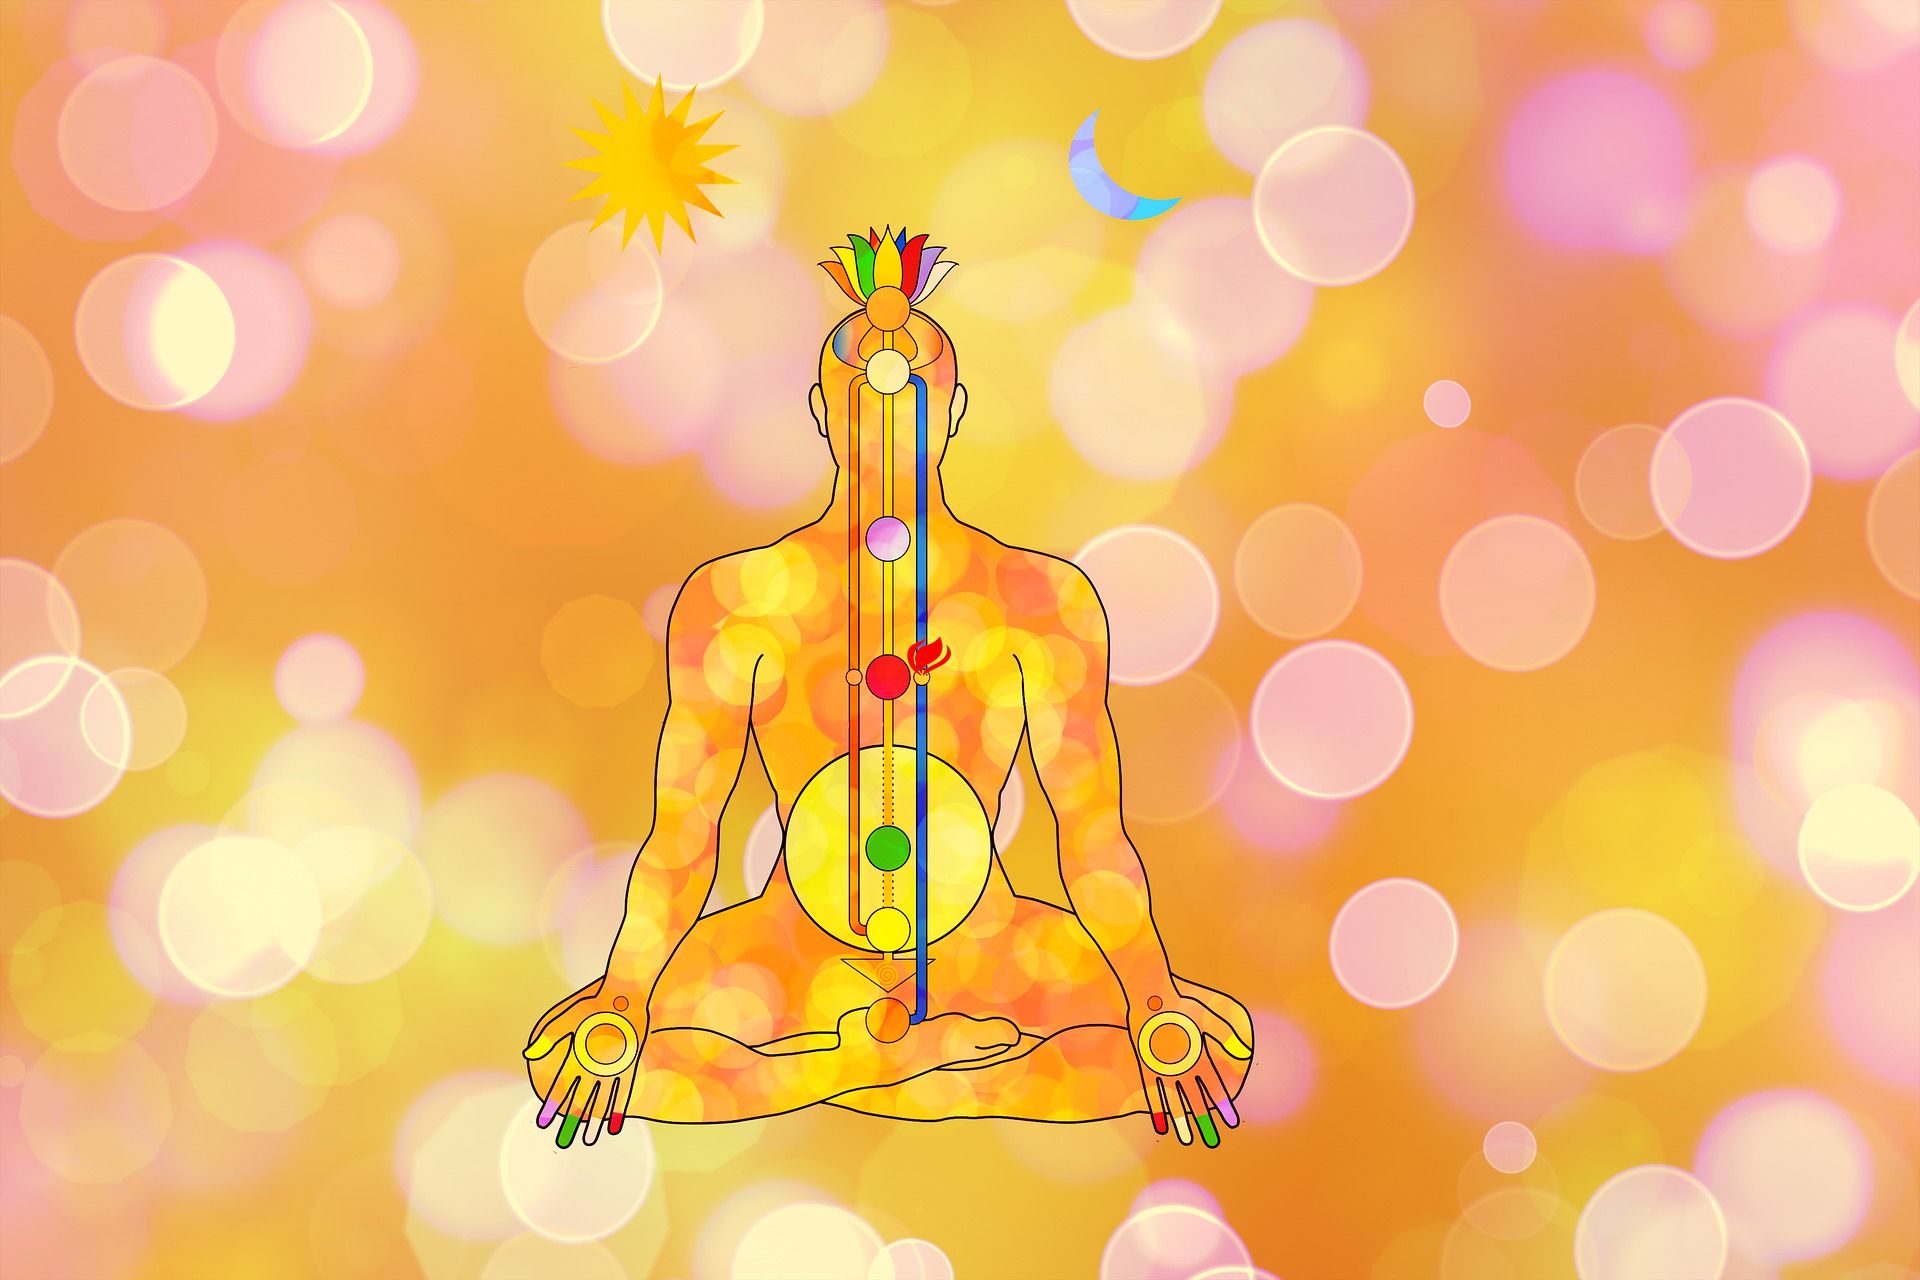 Secret of 7 Chakras - A Journey From Wounds to Wisdom